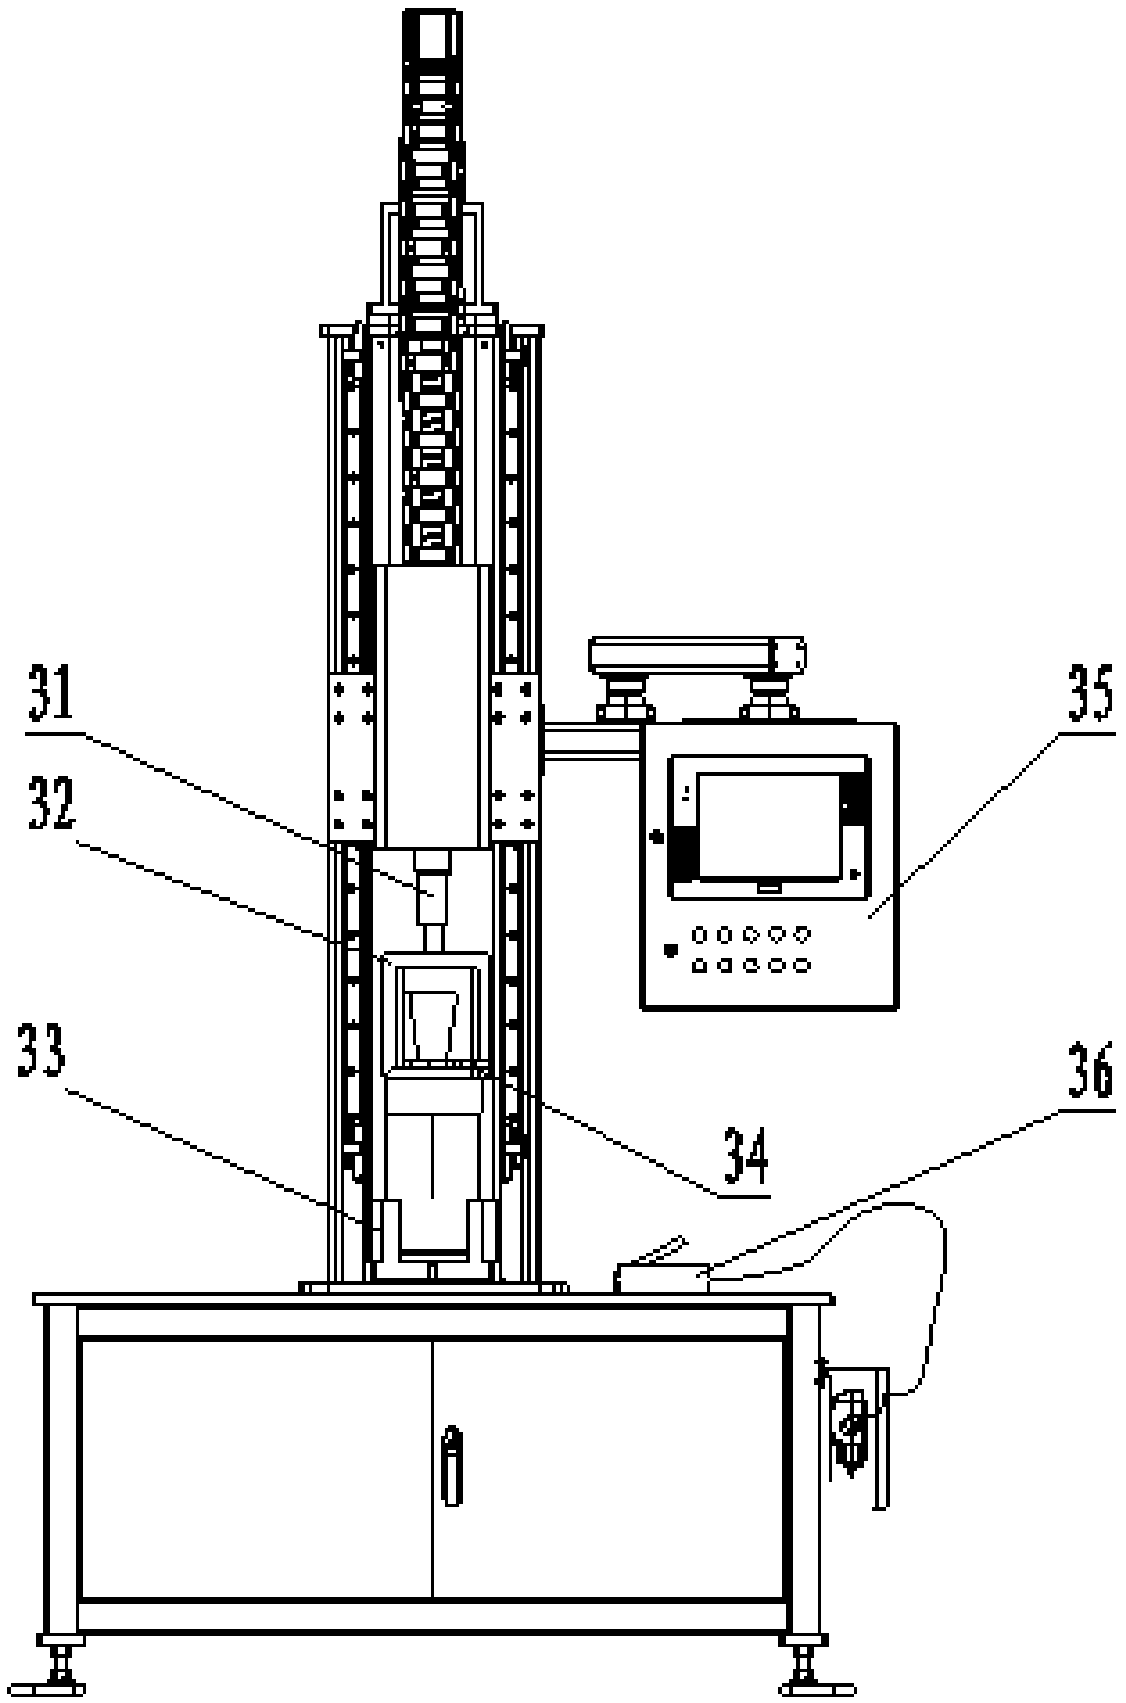 A method and device for automatic loading of small solid rockets based on compression amount control